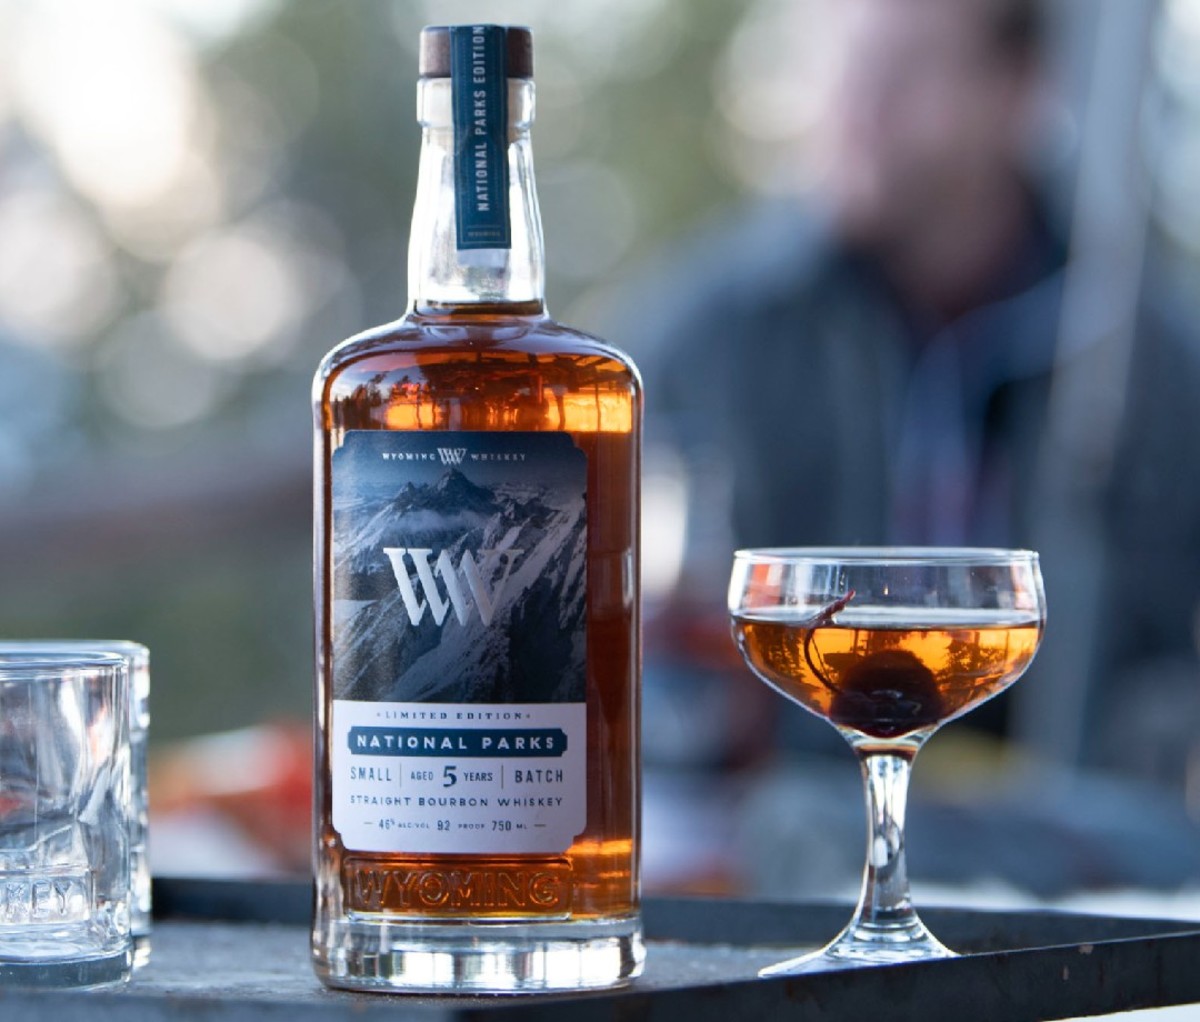 A bottle of Wyoming National Parks Limited Edition Small Batch Bourbon next to what may be an Old Fashioned cocktail.